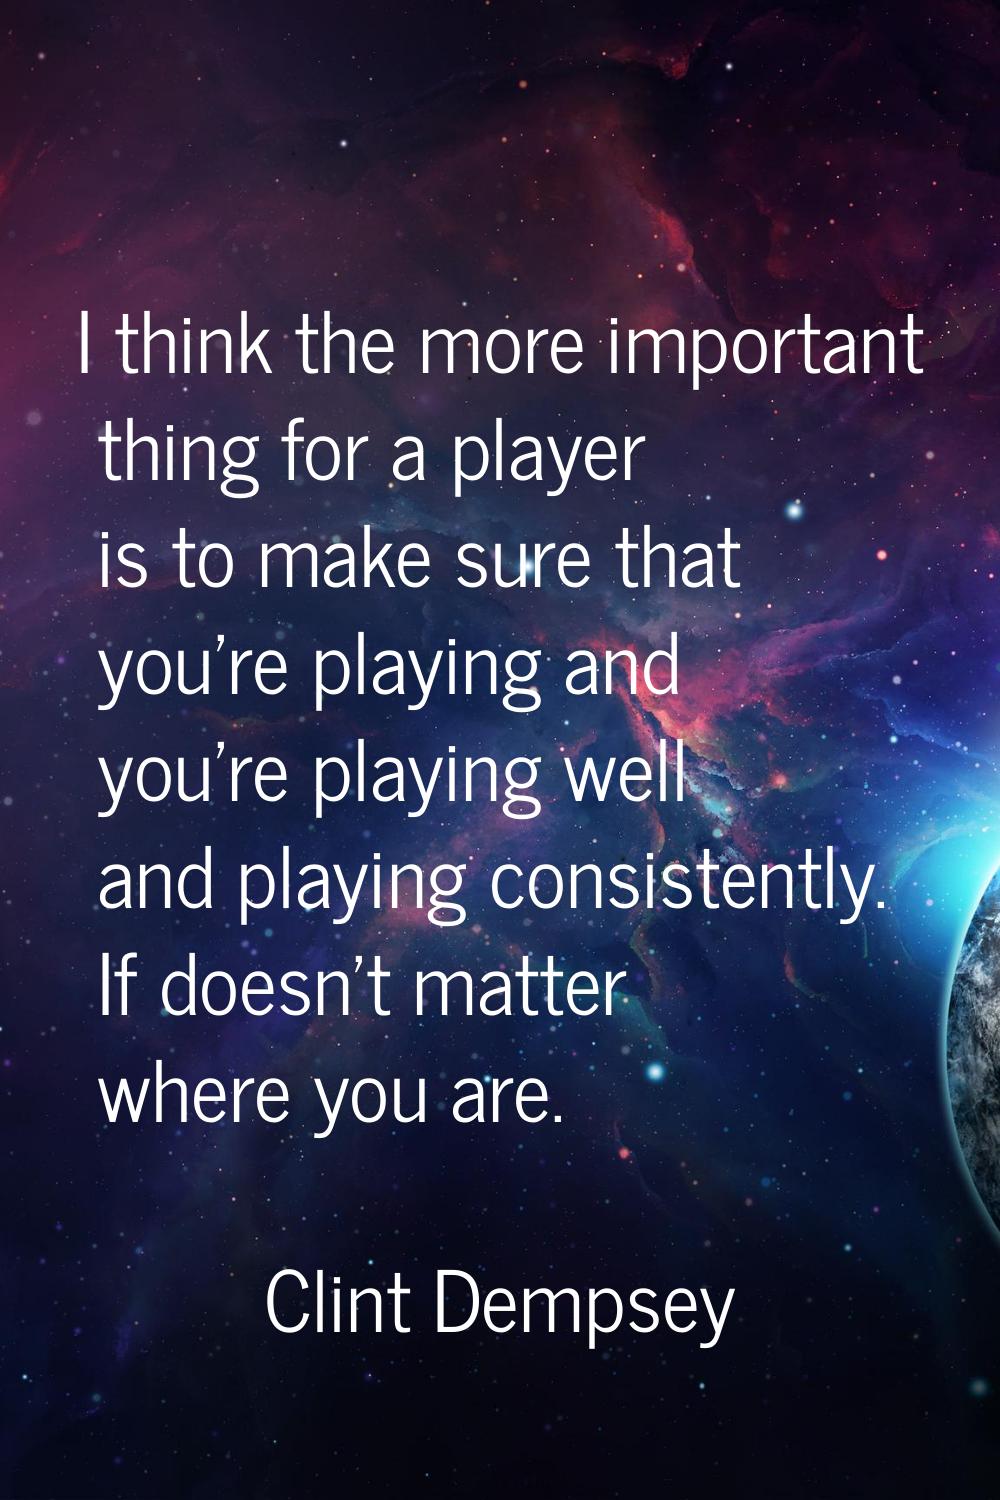 I think the more important thing for a player is to make sure that you're playing and you're playin